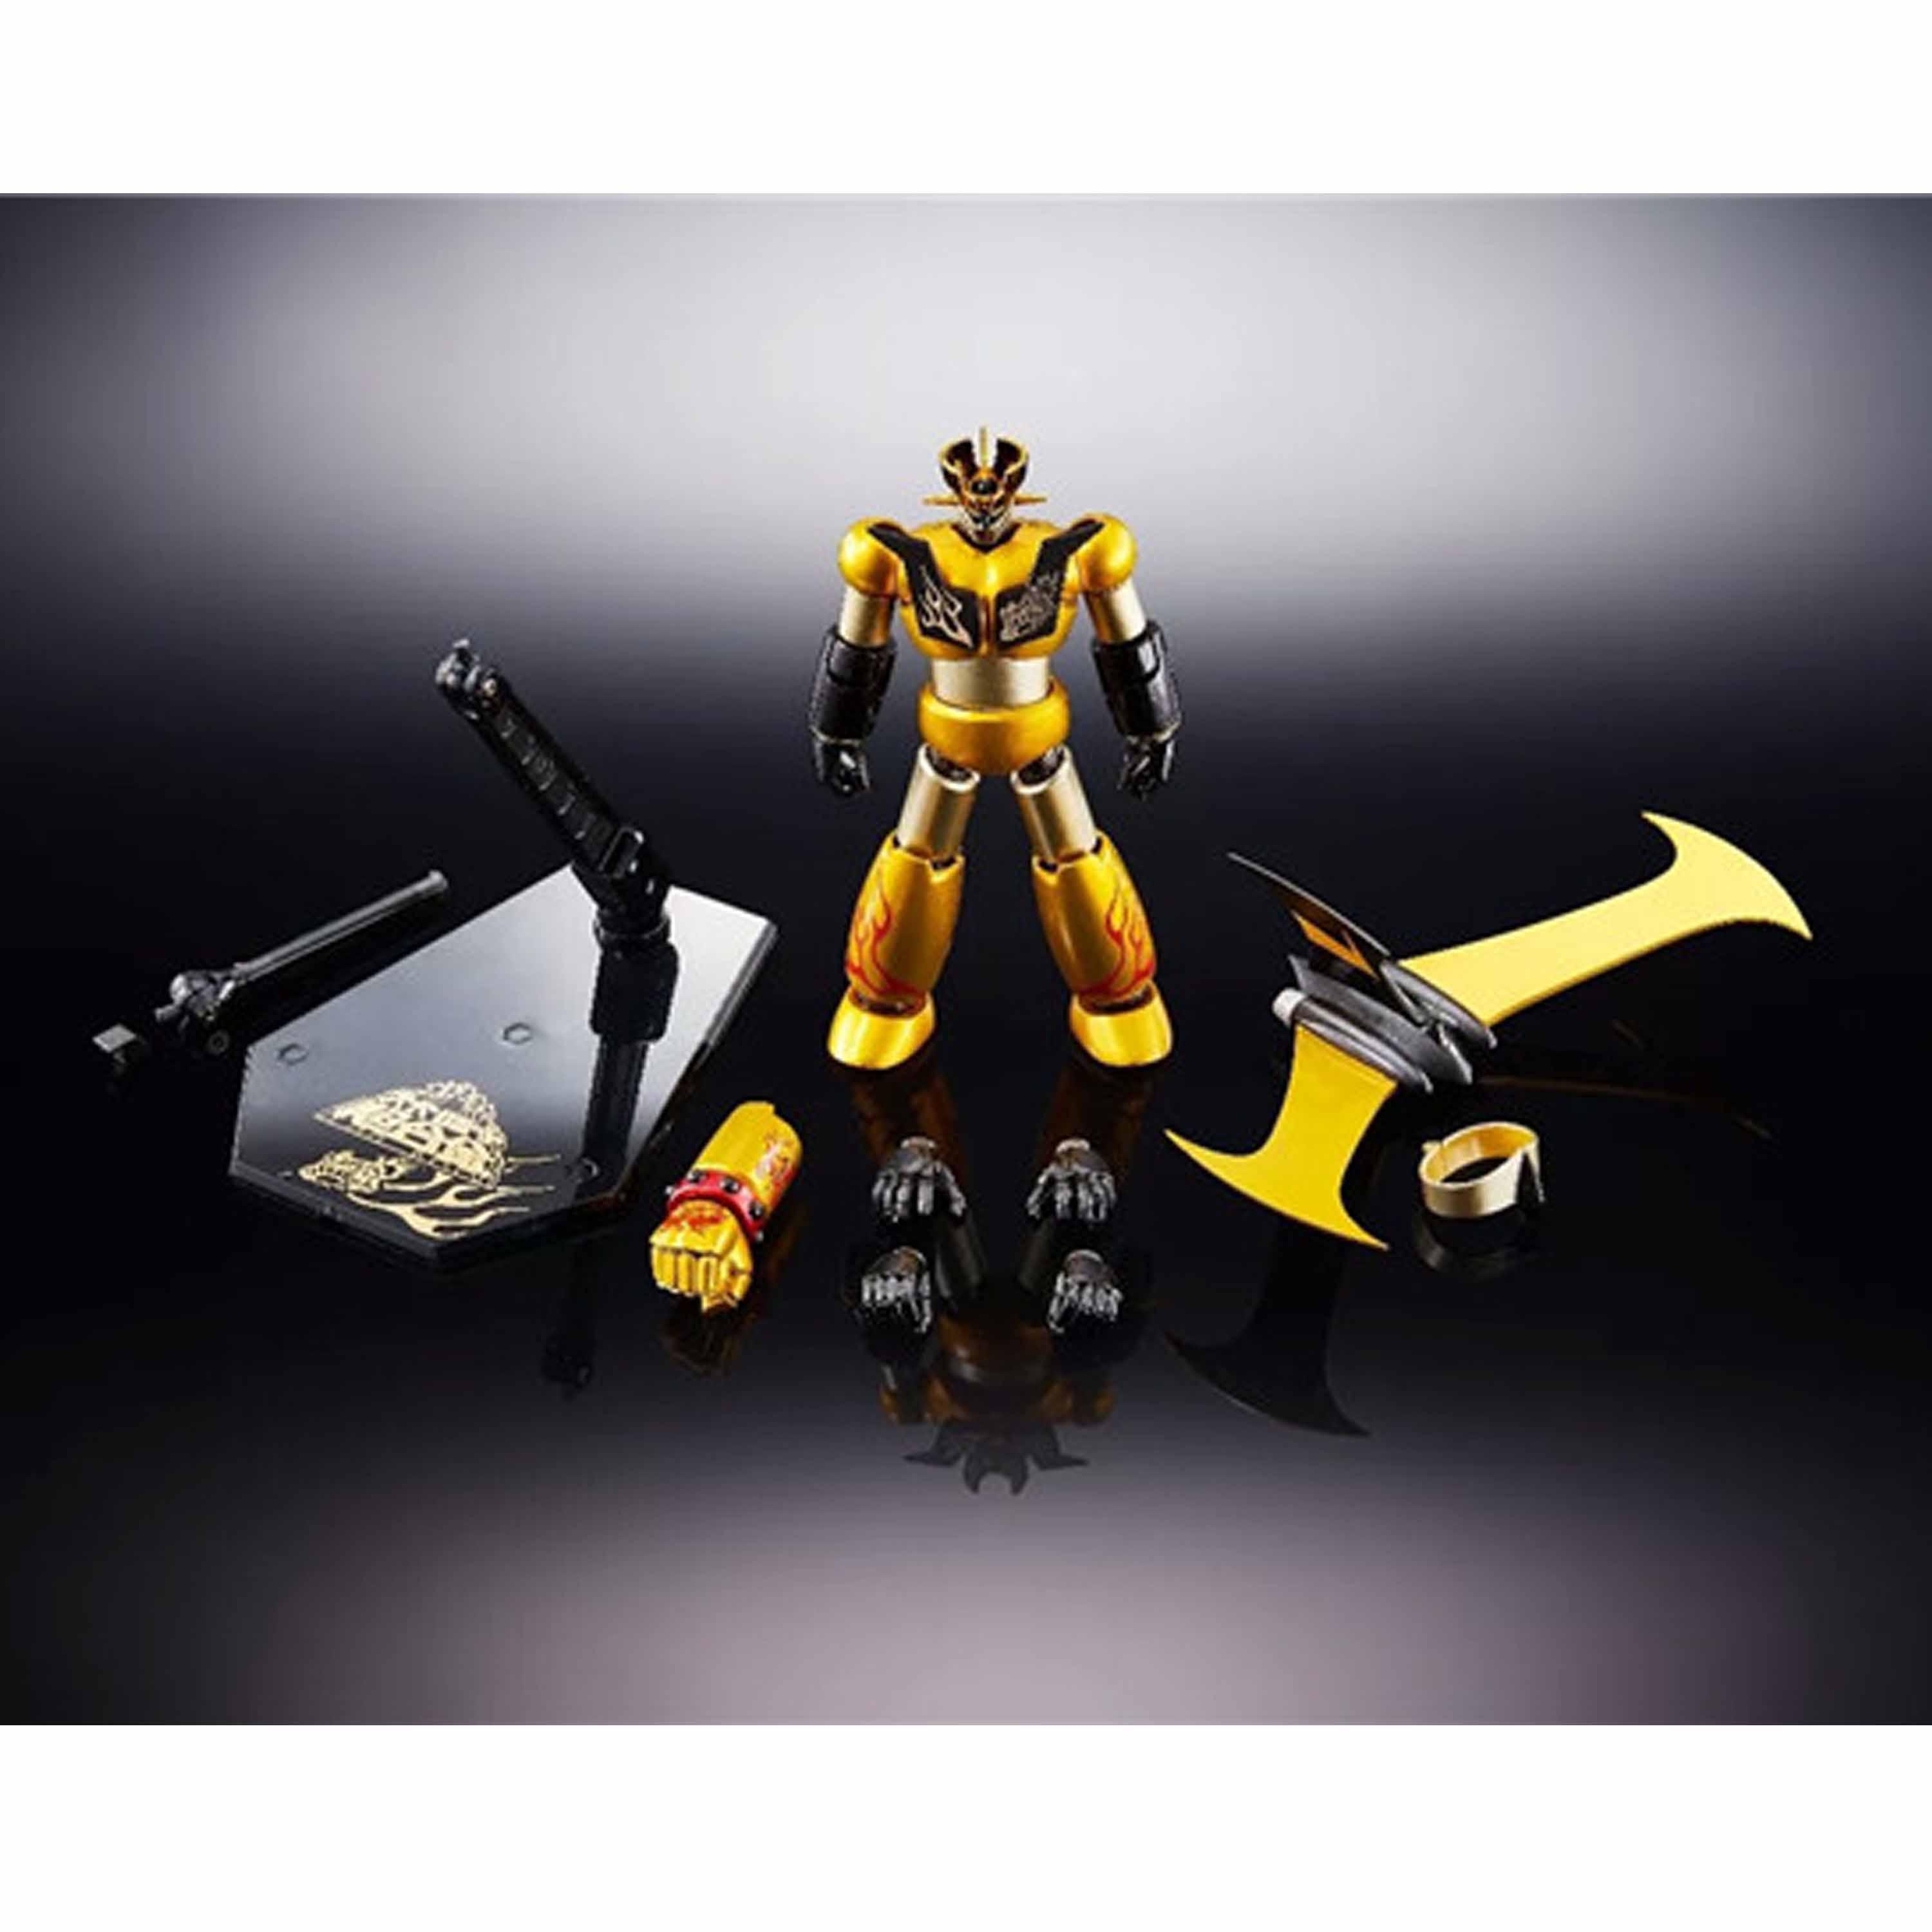 SRC Mazinger Z Year Model 2018 Dog Edition (Asia Limited 2018)